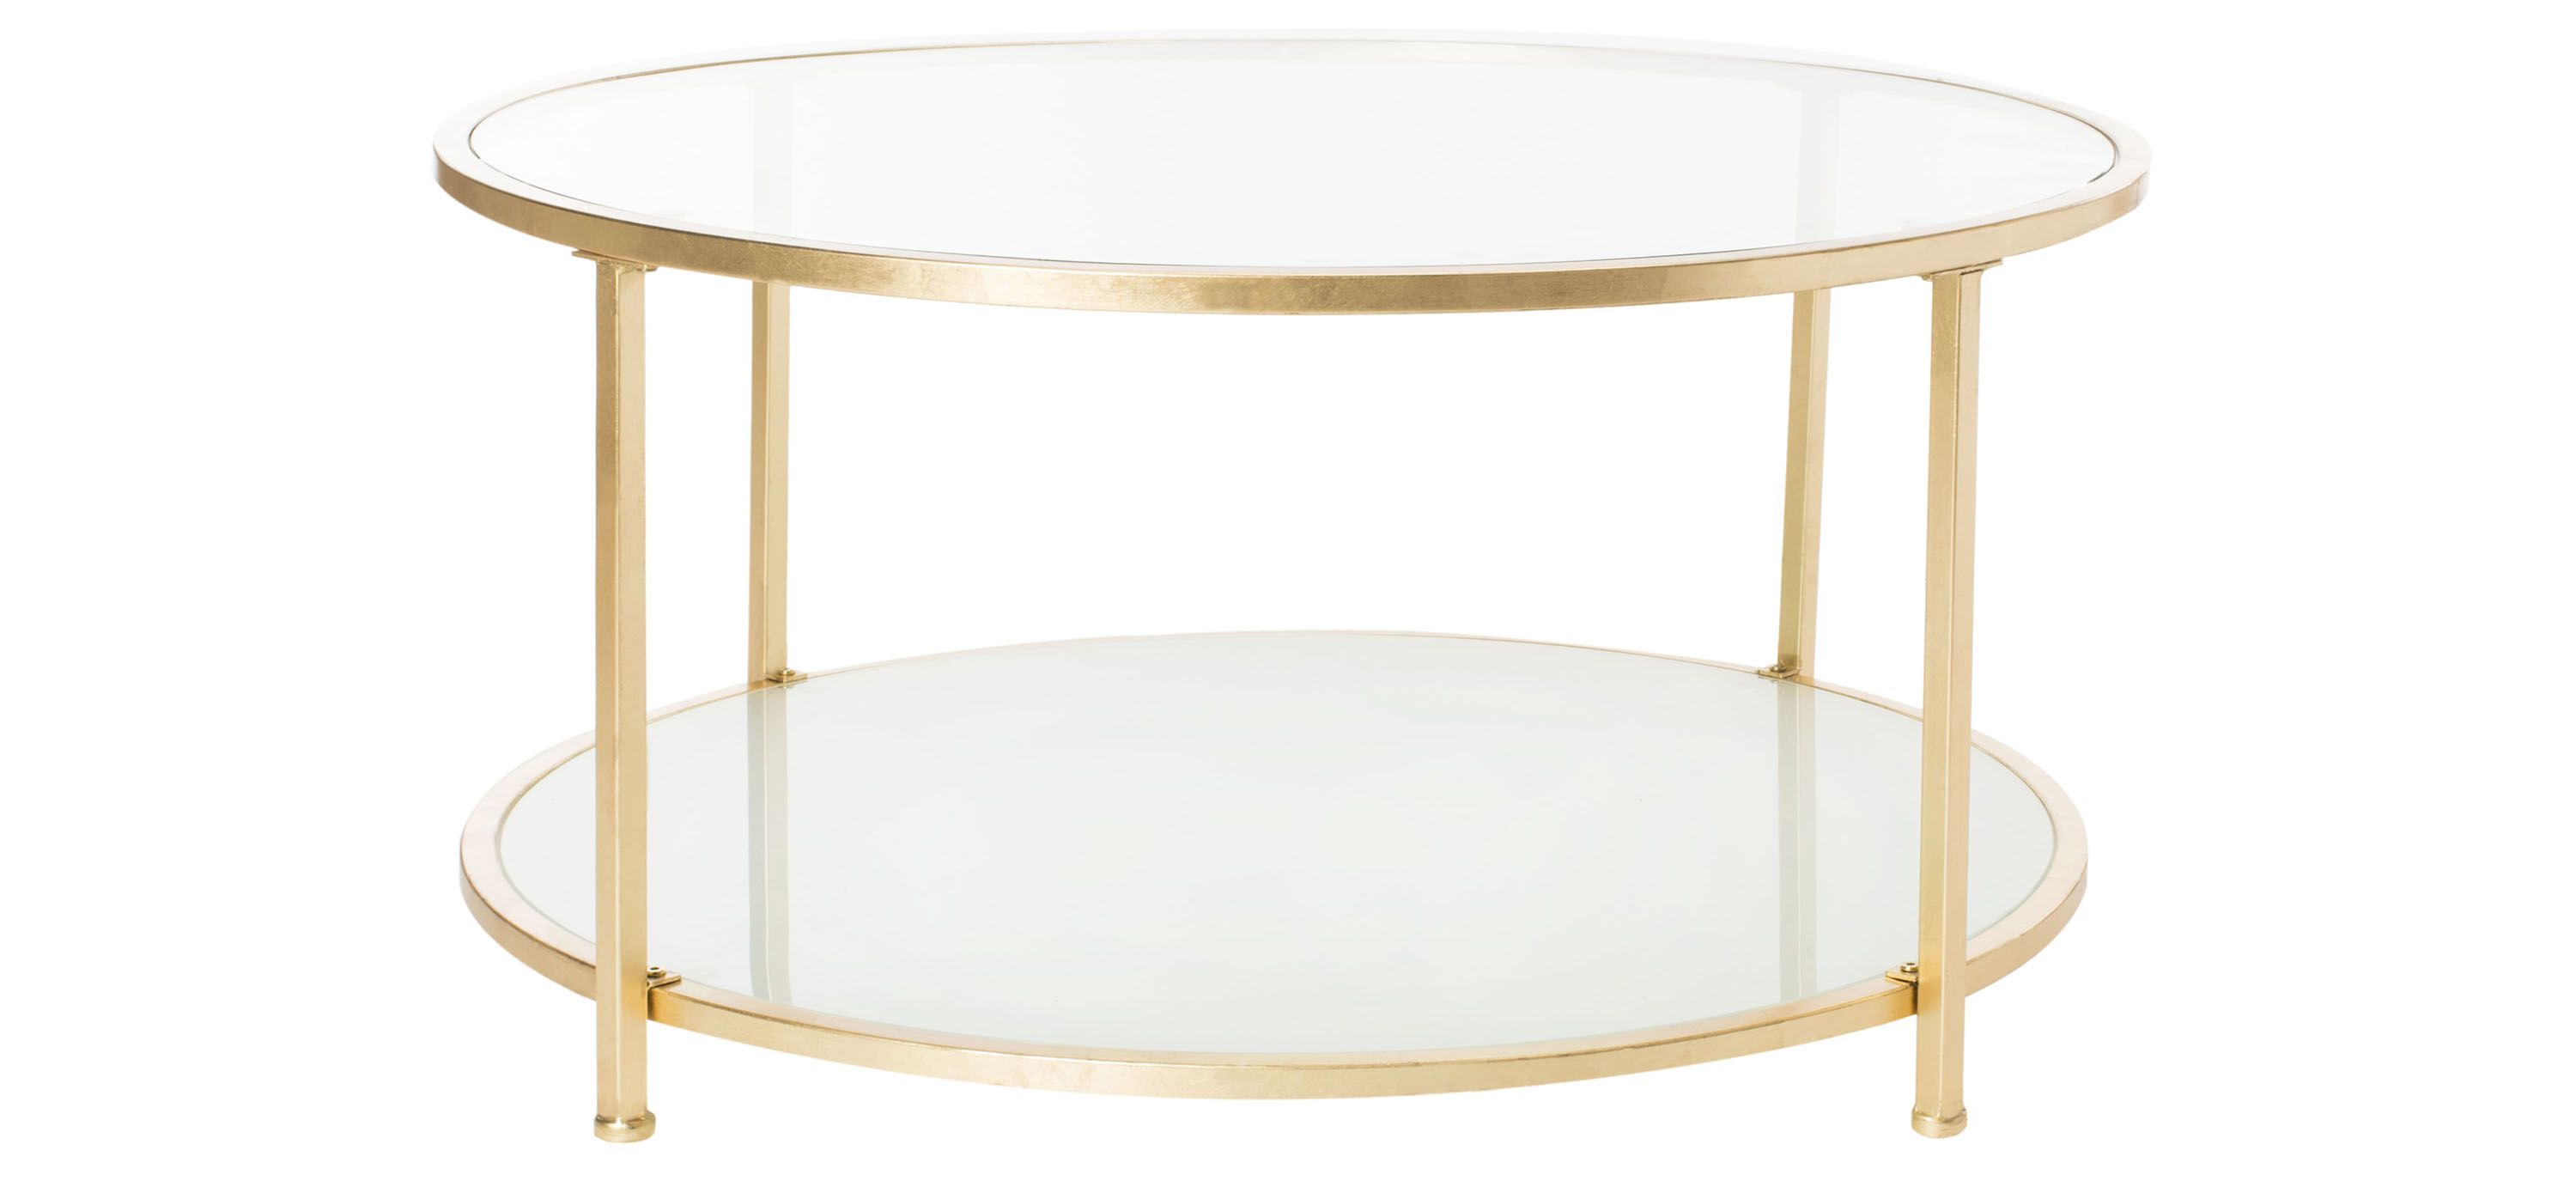 Patience 2 Tier Round Coffee Table